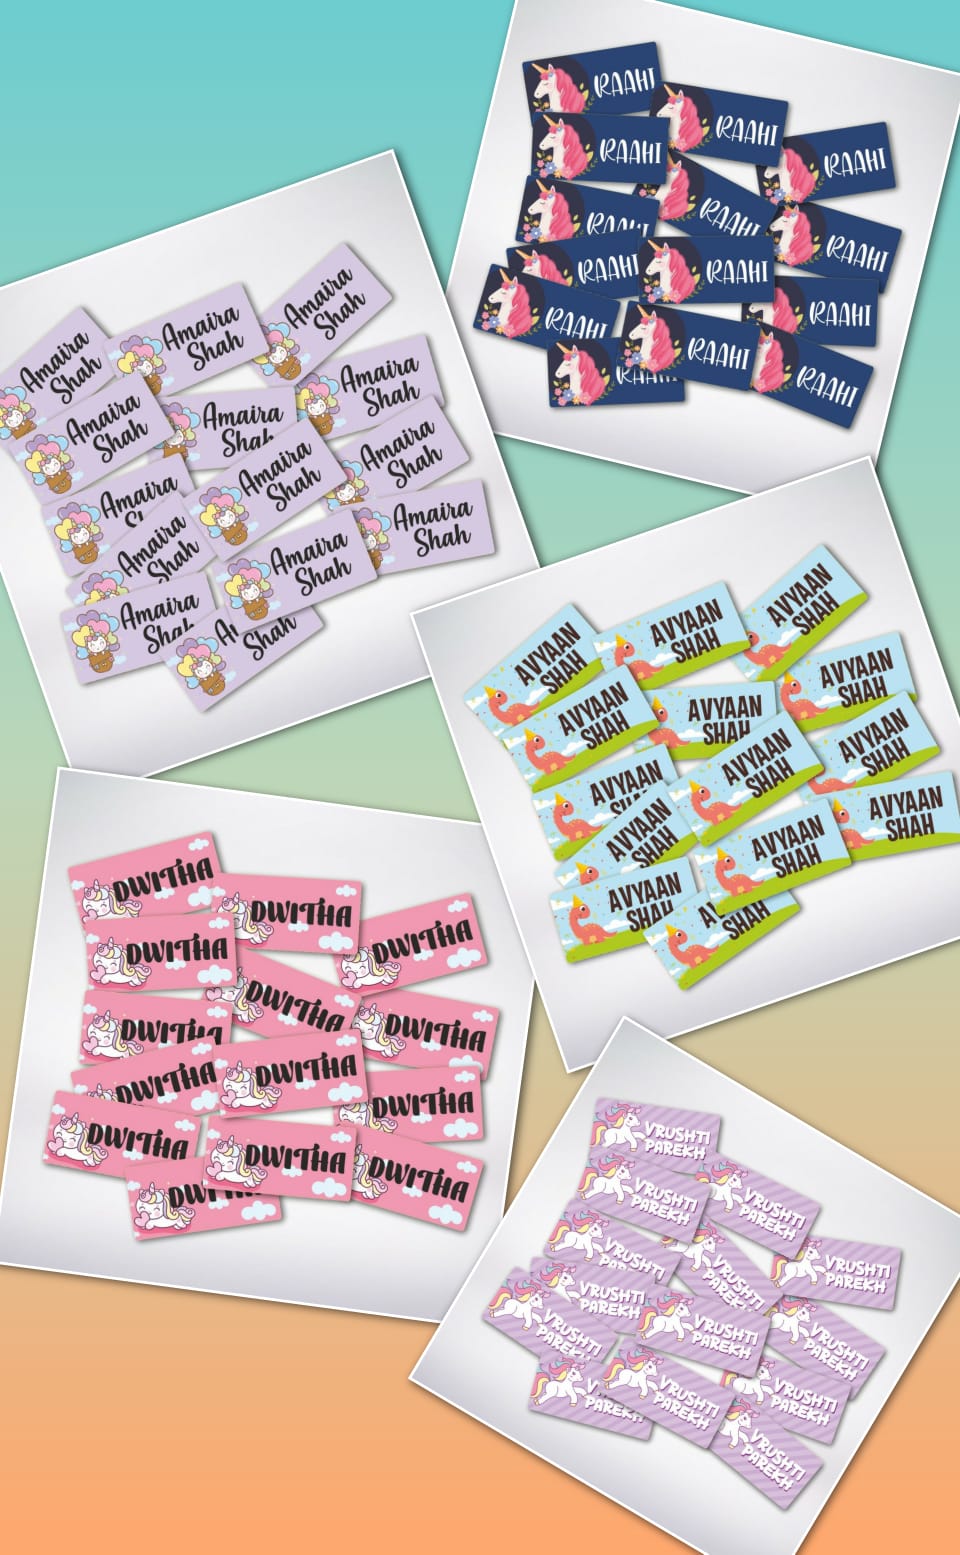 Customized Waterproof Stickers for Kids